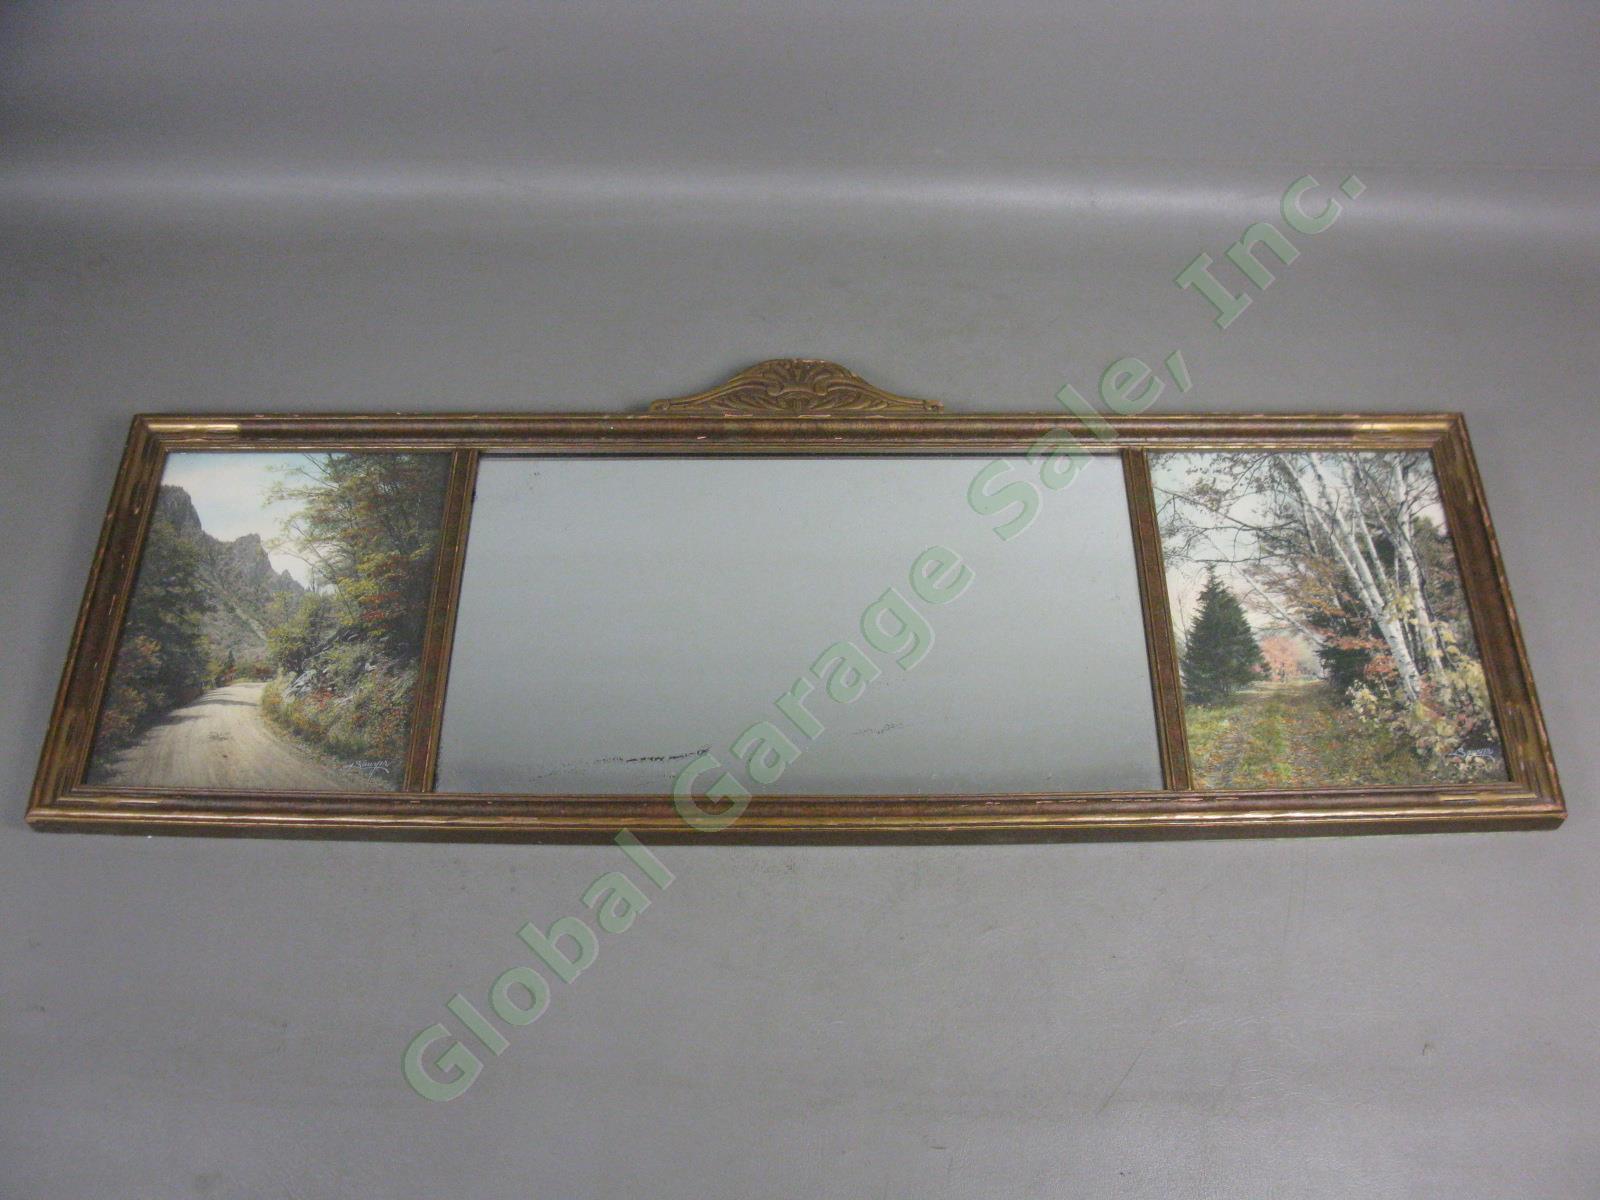 Antique 1920s Wall Mirror Charles Sawyer Hand Colored Photos Franconia Notch NH